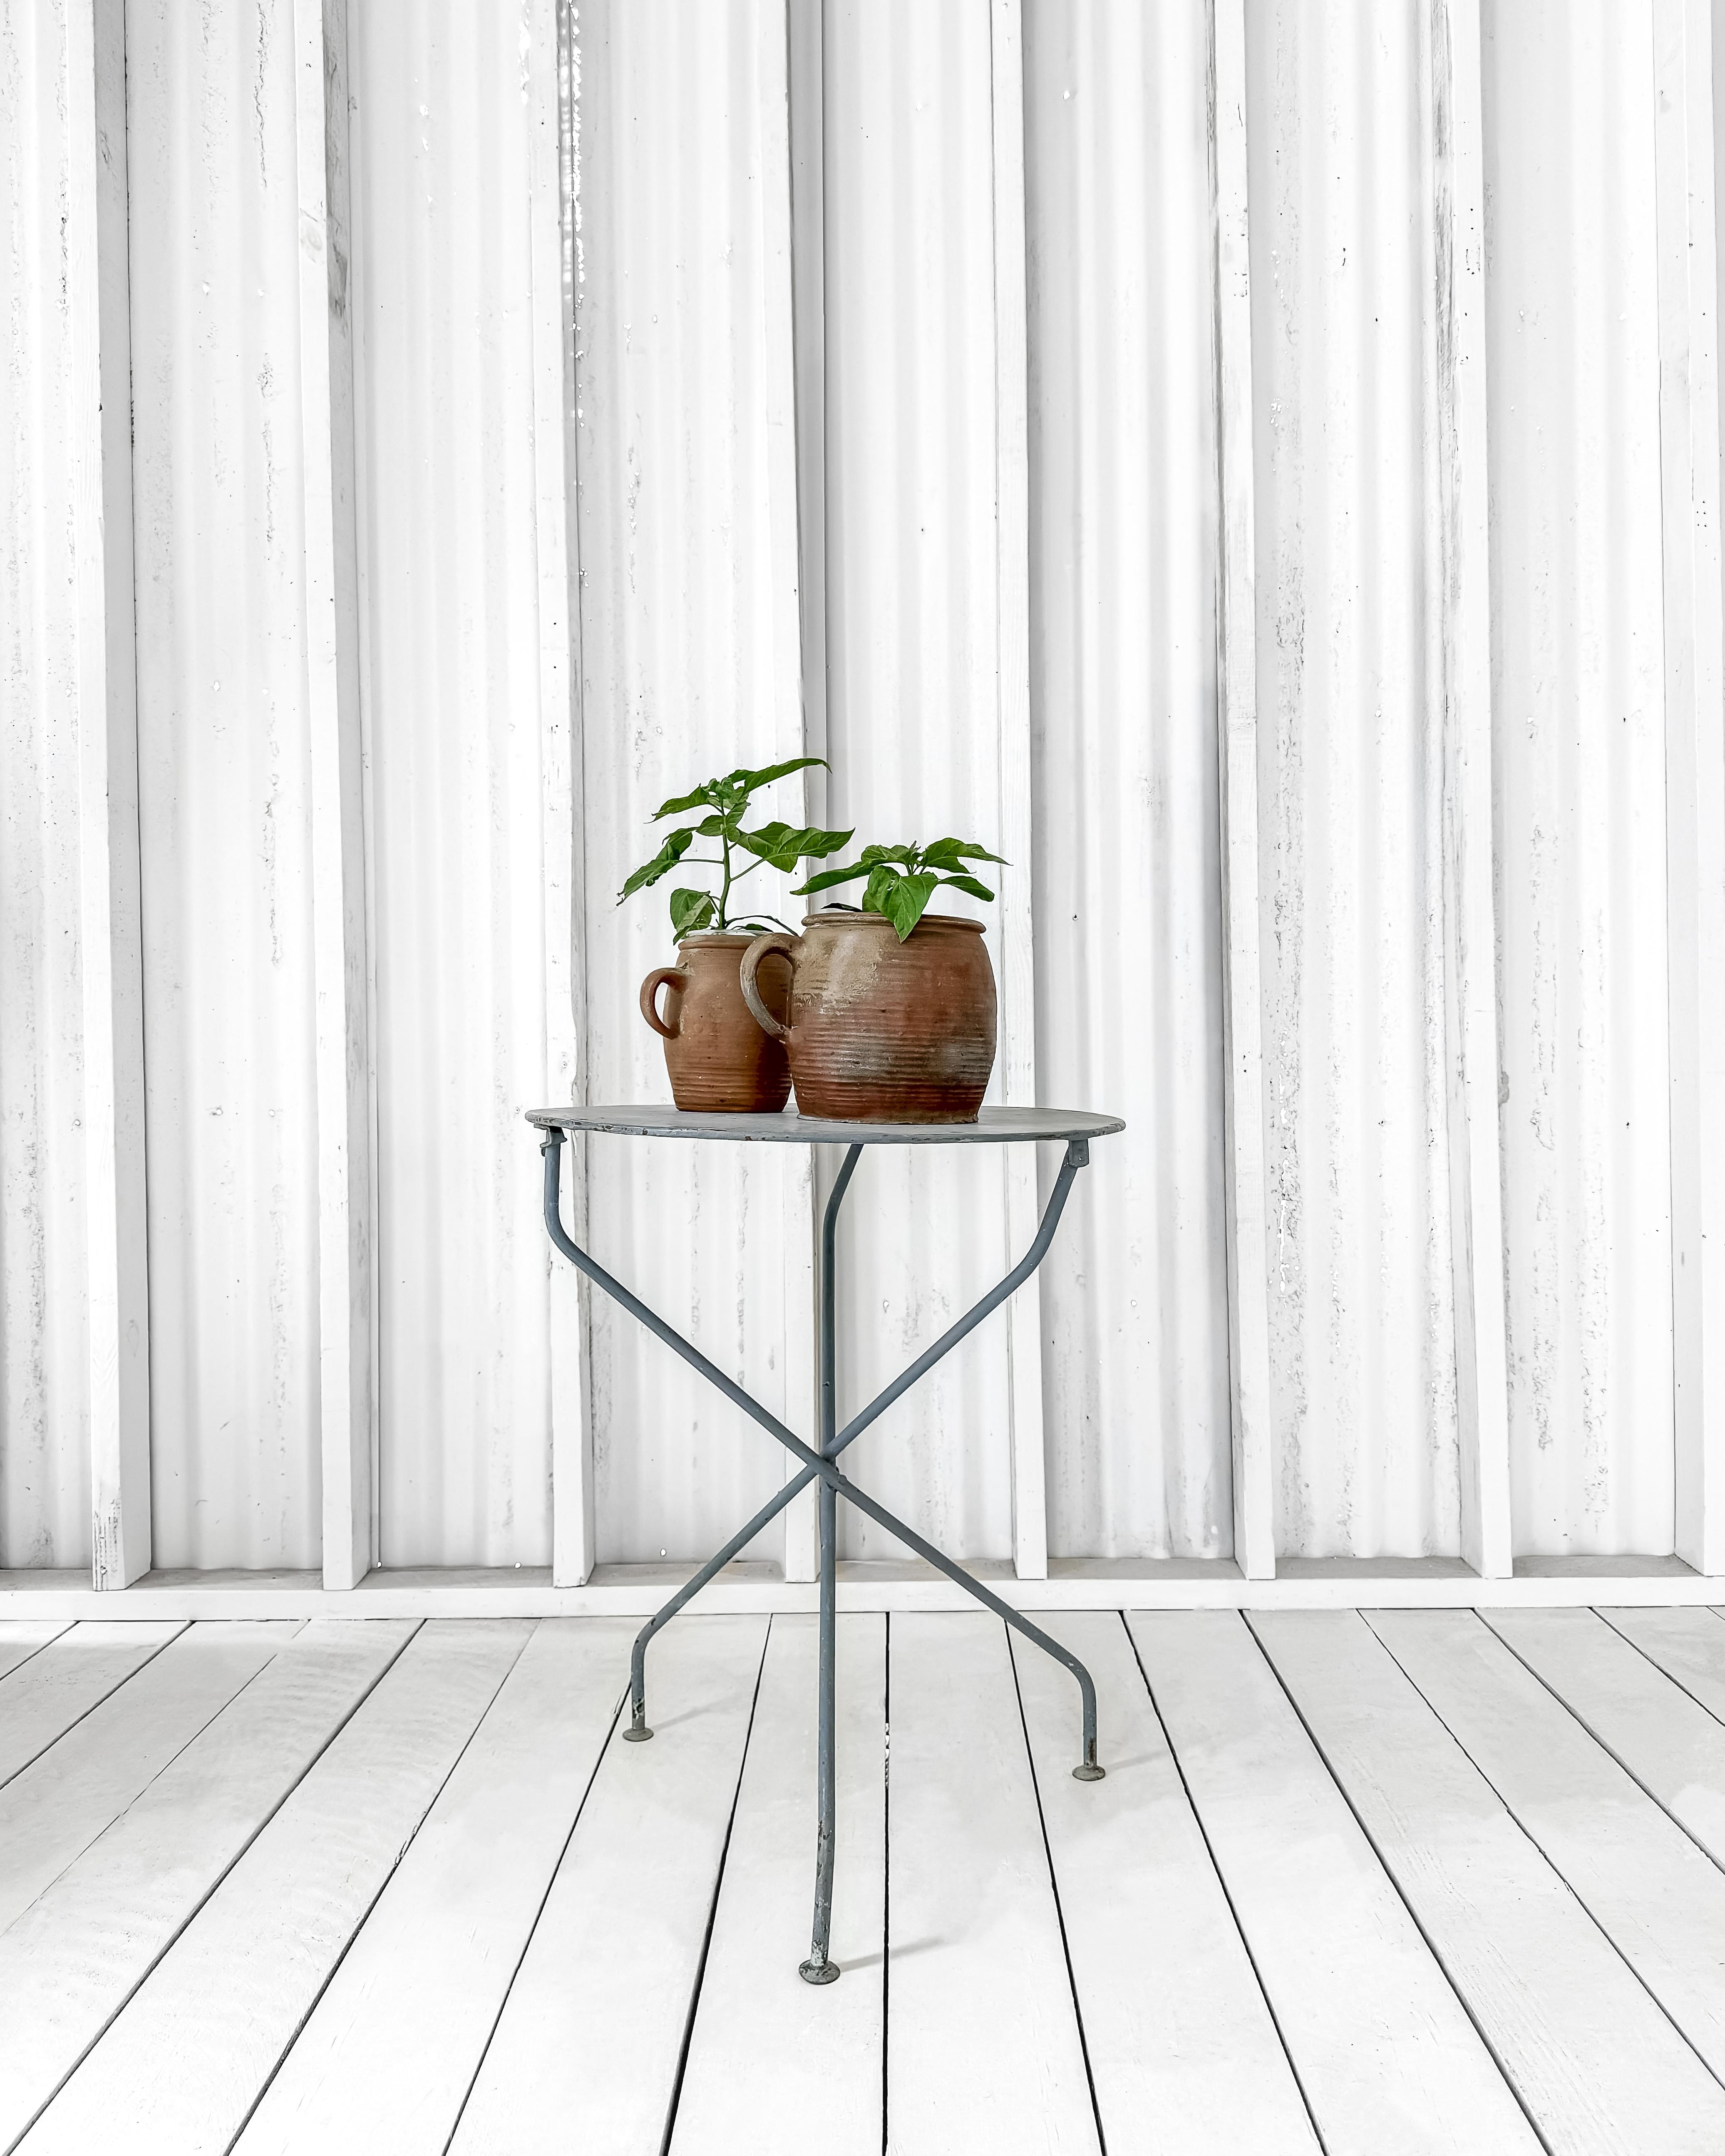 A lovely versatile vintage metal table, featuring a simple and chic design that complements any decor style. Crafted for indoor or outdoor use, this table is as practical as it is stylish.

Constructed from durable metal, this table is built to last